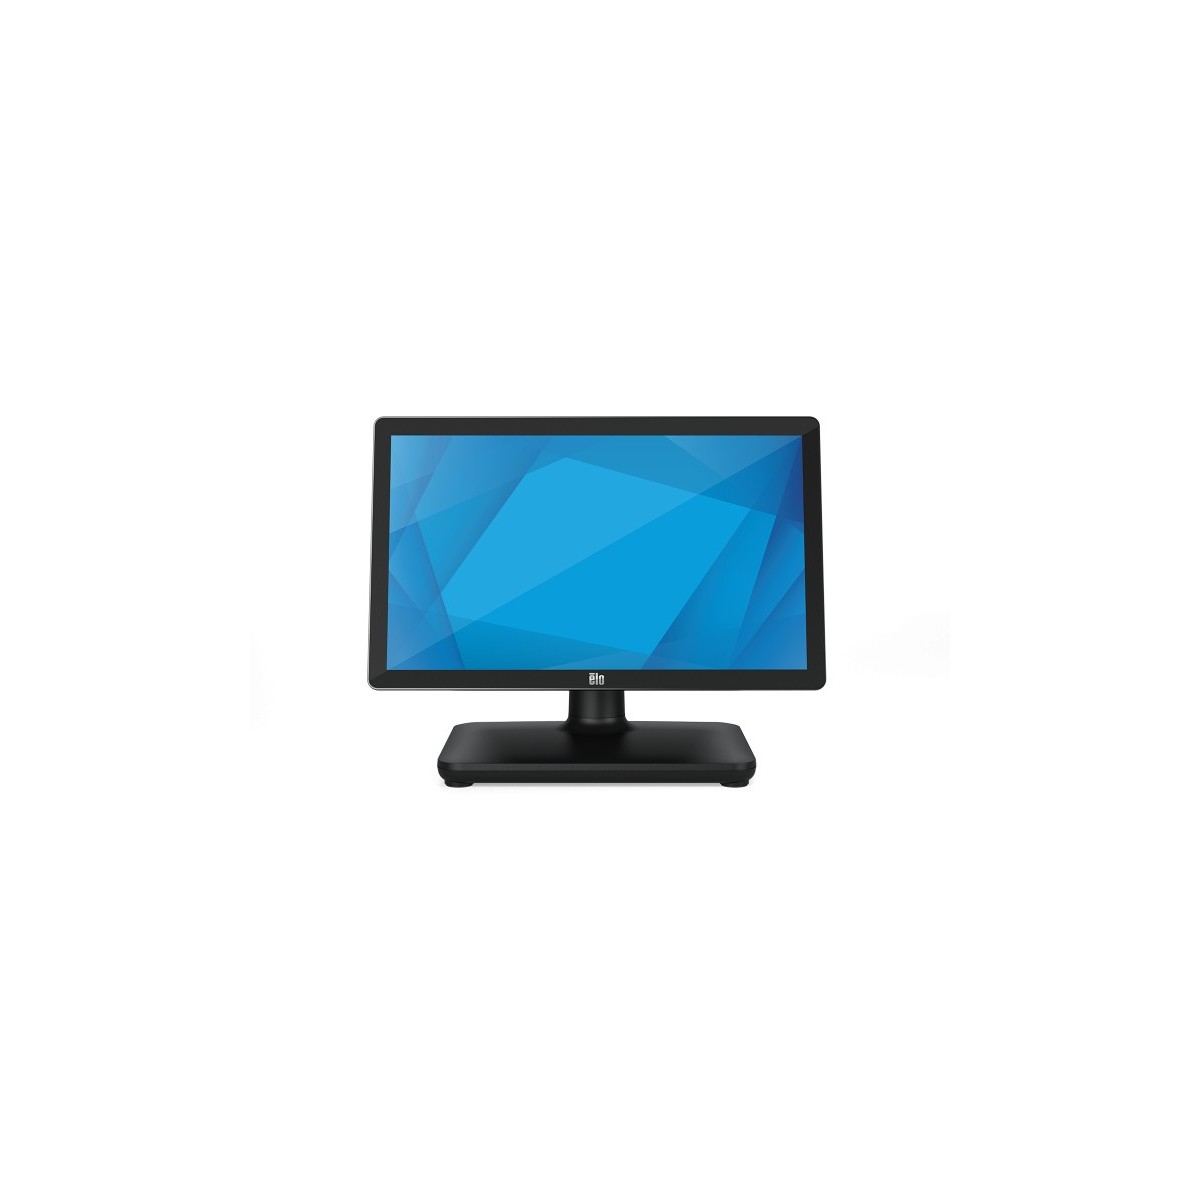 Elo Touch Solutions Elo Touch Solution E937154 - 54.6 cm (21.5") - 1920 x 1080 pixels - LCD - 212.5 cd/m² - Projected capacitive